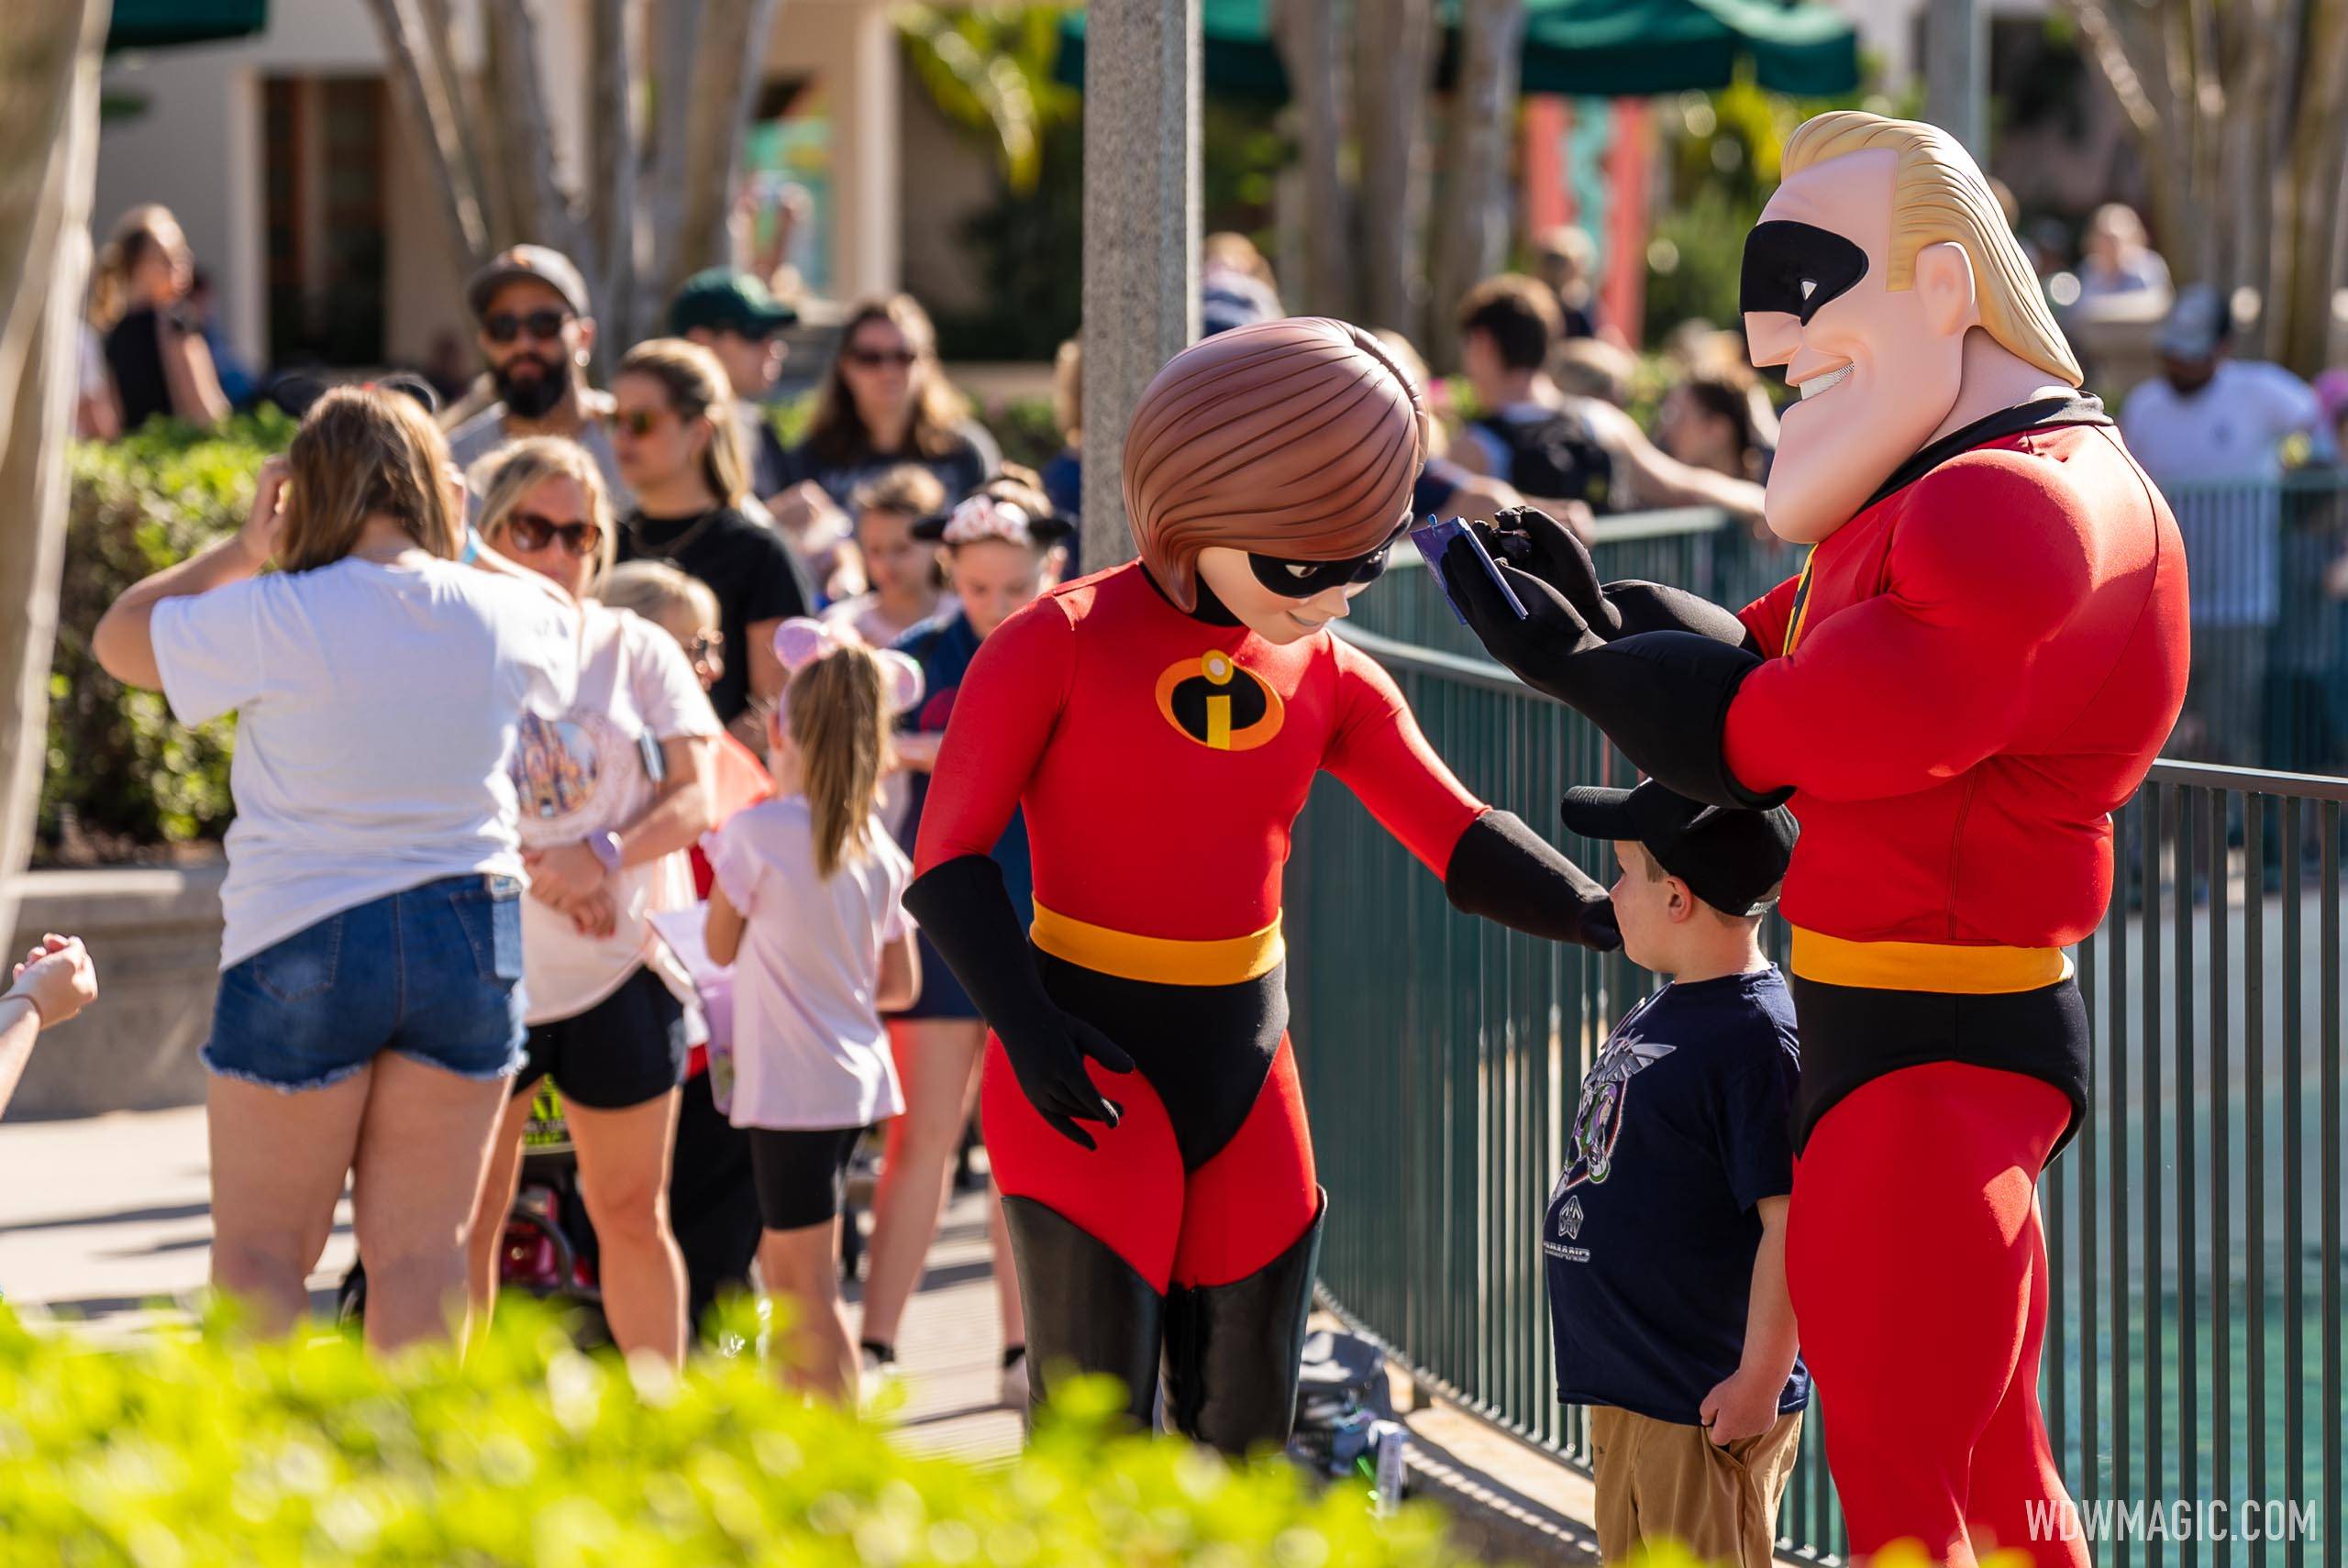 The Incredibles characters at Echo Lake - February 2023